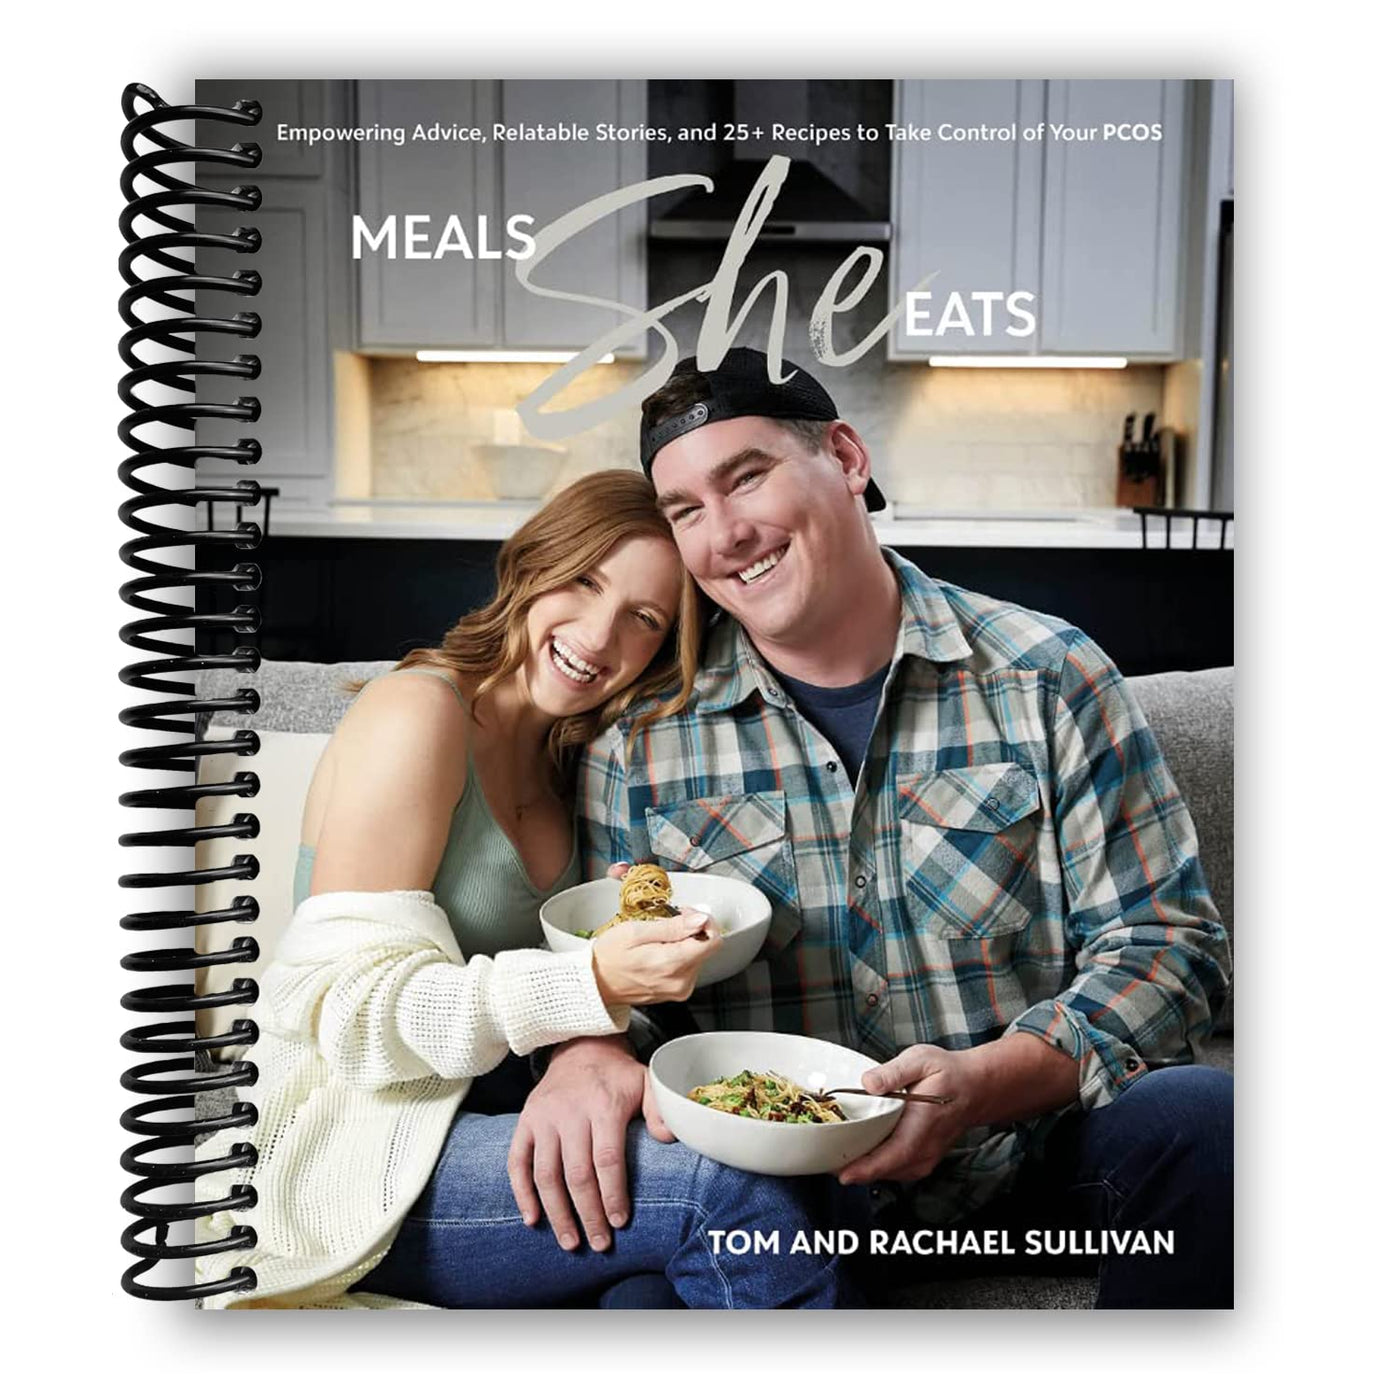 Meals She Eats: Empowering Advice, Relatable Stories, and Over 25 Recipes to Take Control of Your PCOS (Spiral Bound)